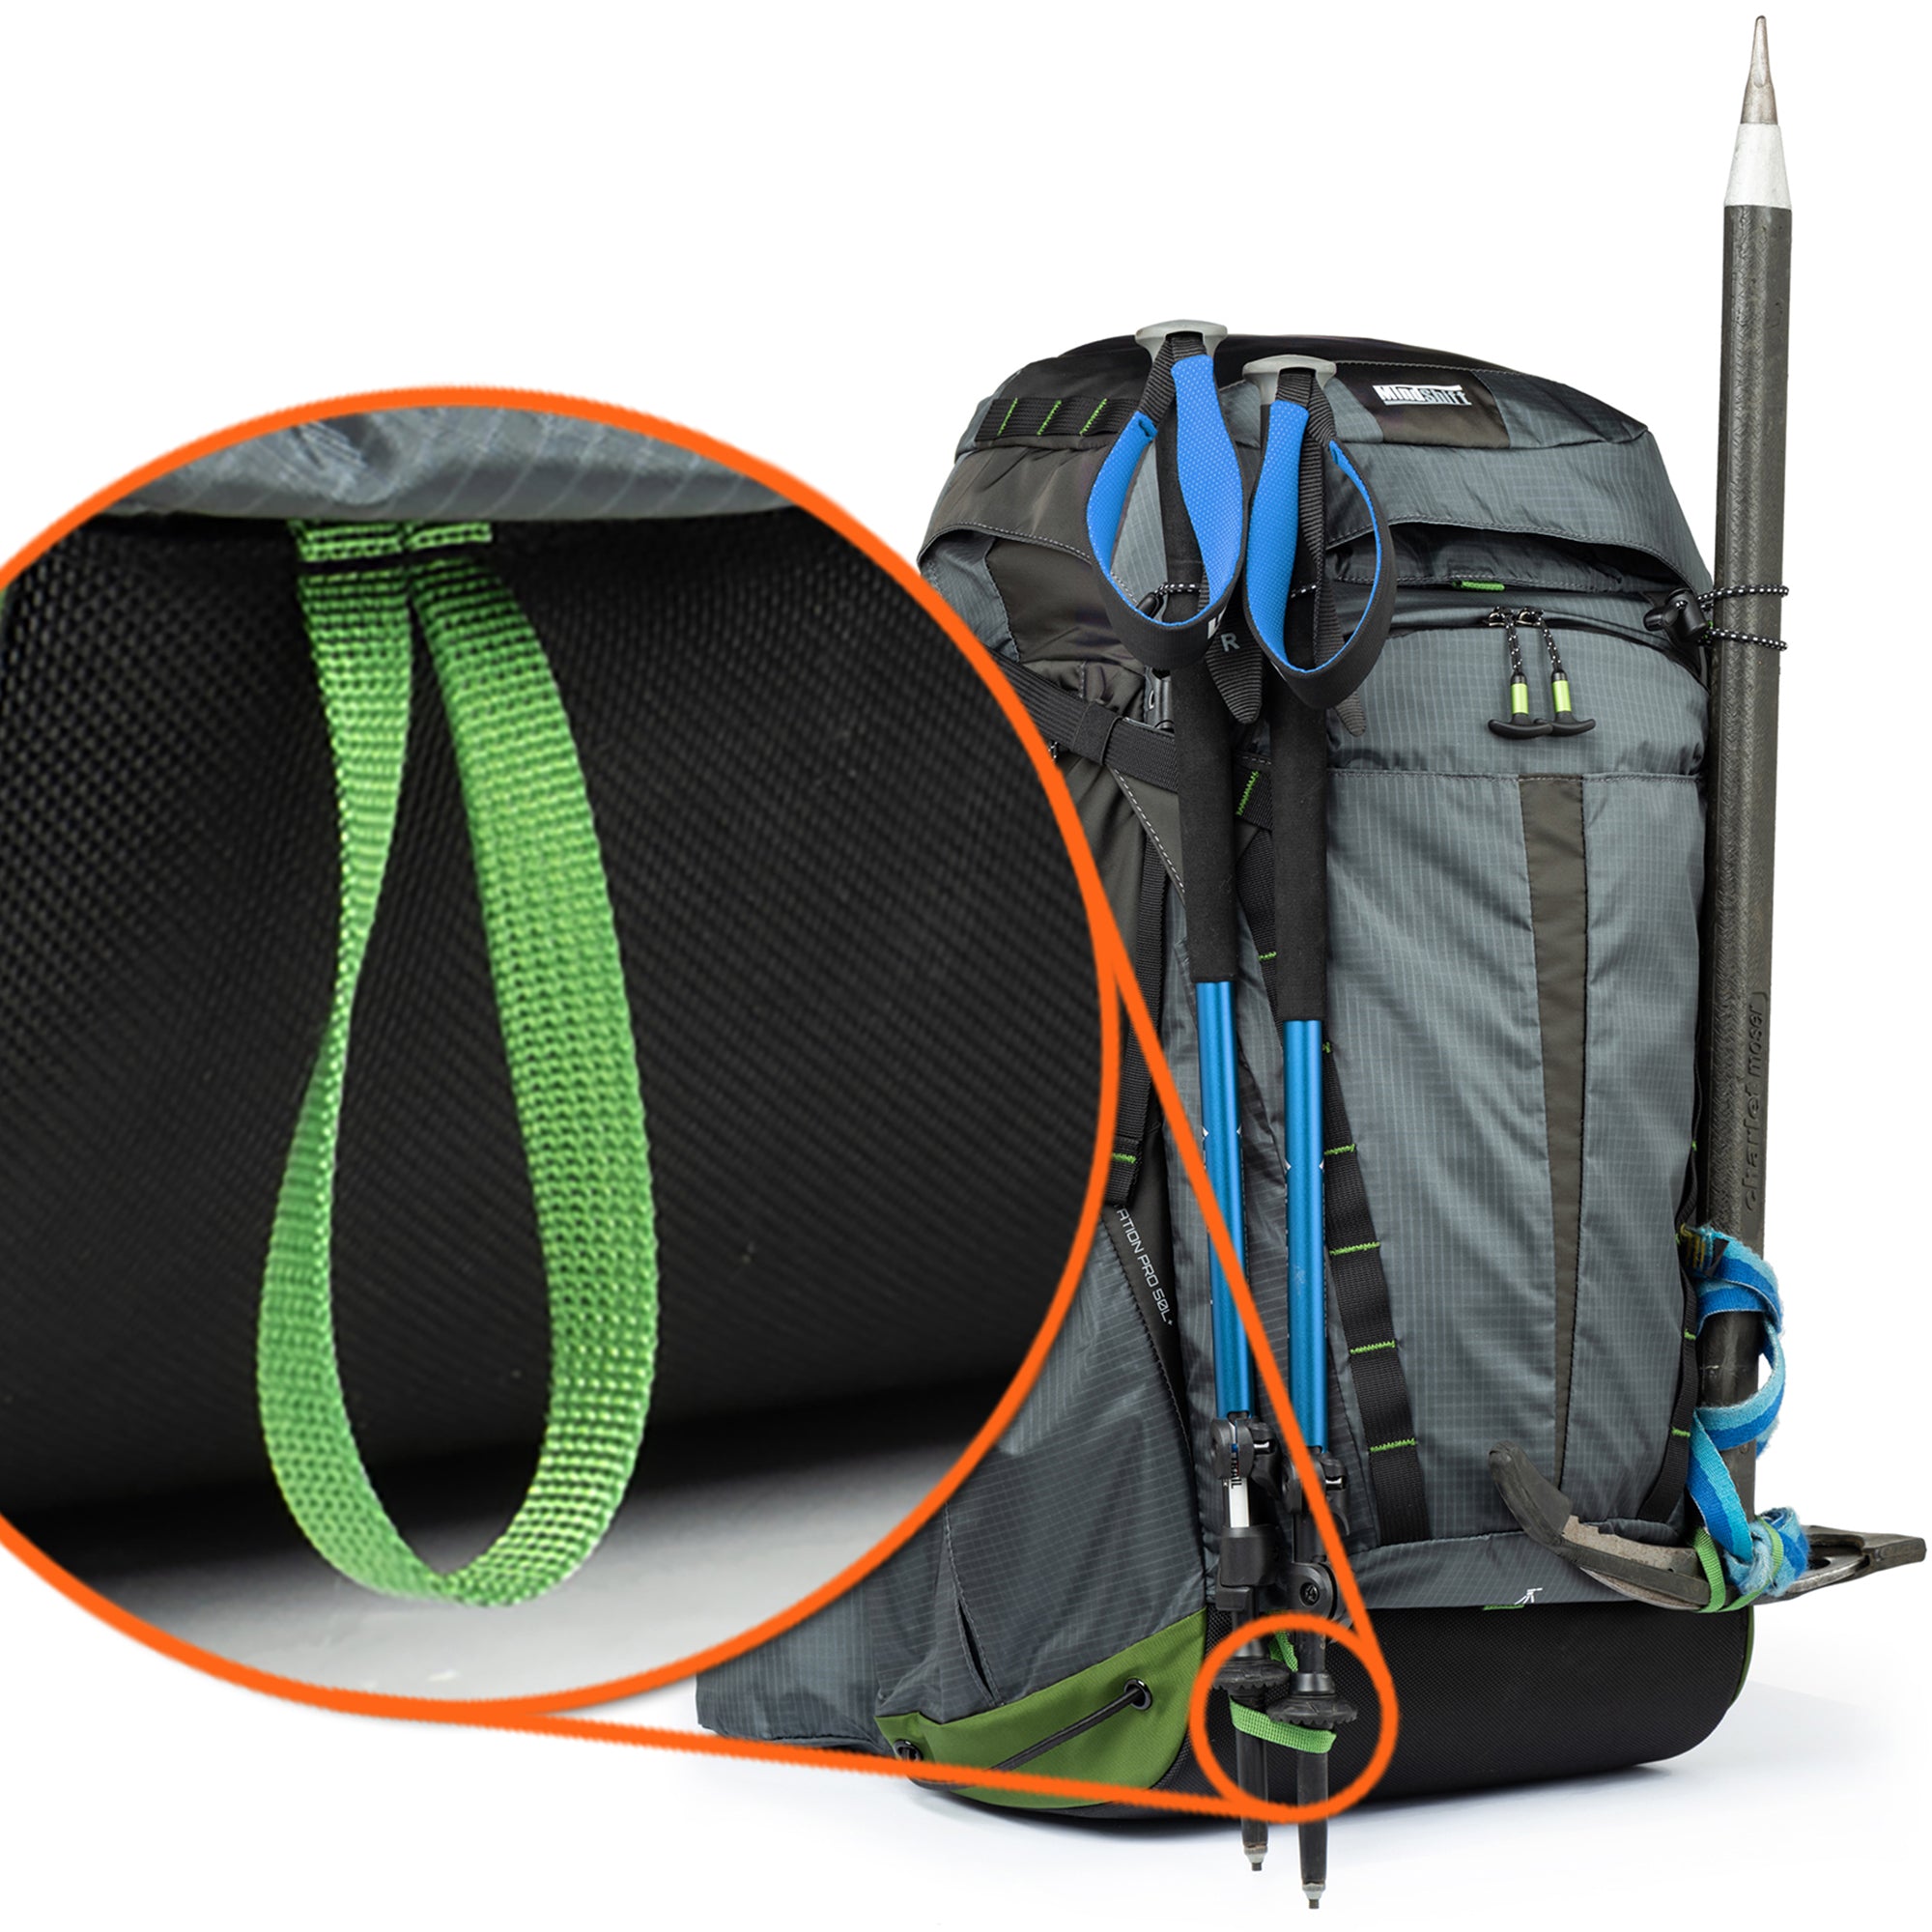 Mountain axe/hiking pole loops - ROTATION 22L features 1 loop